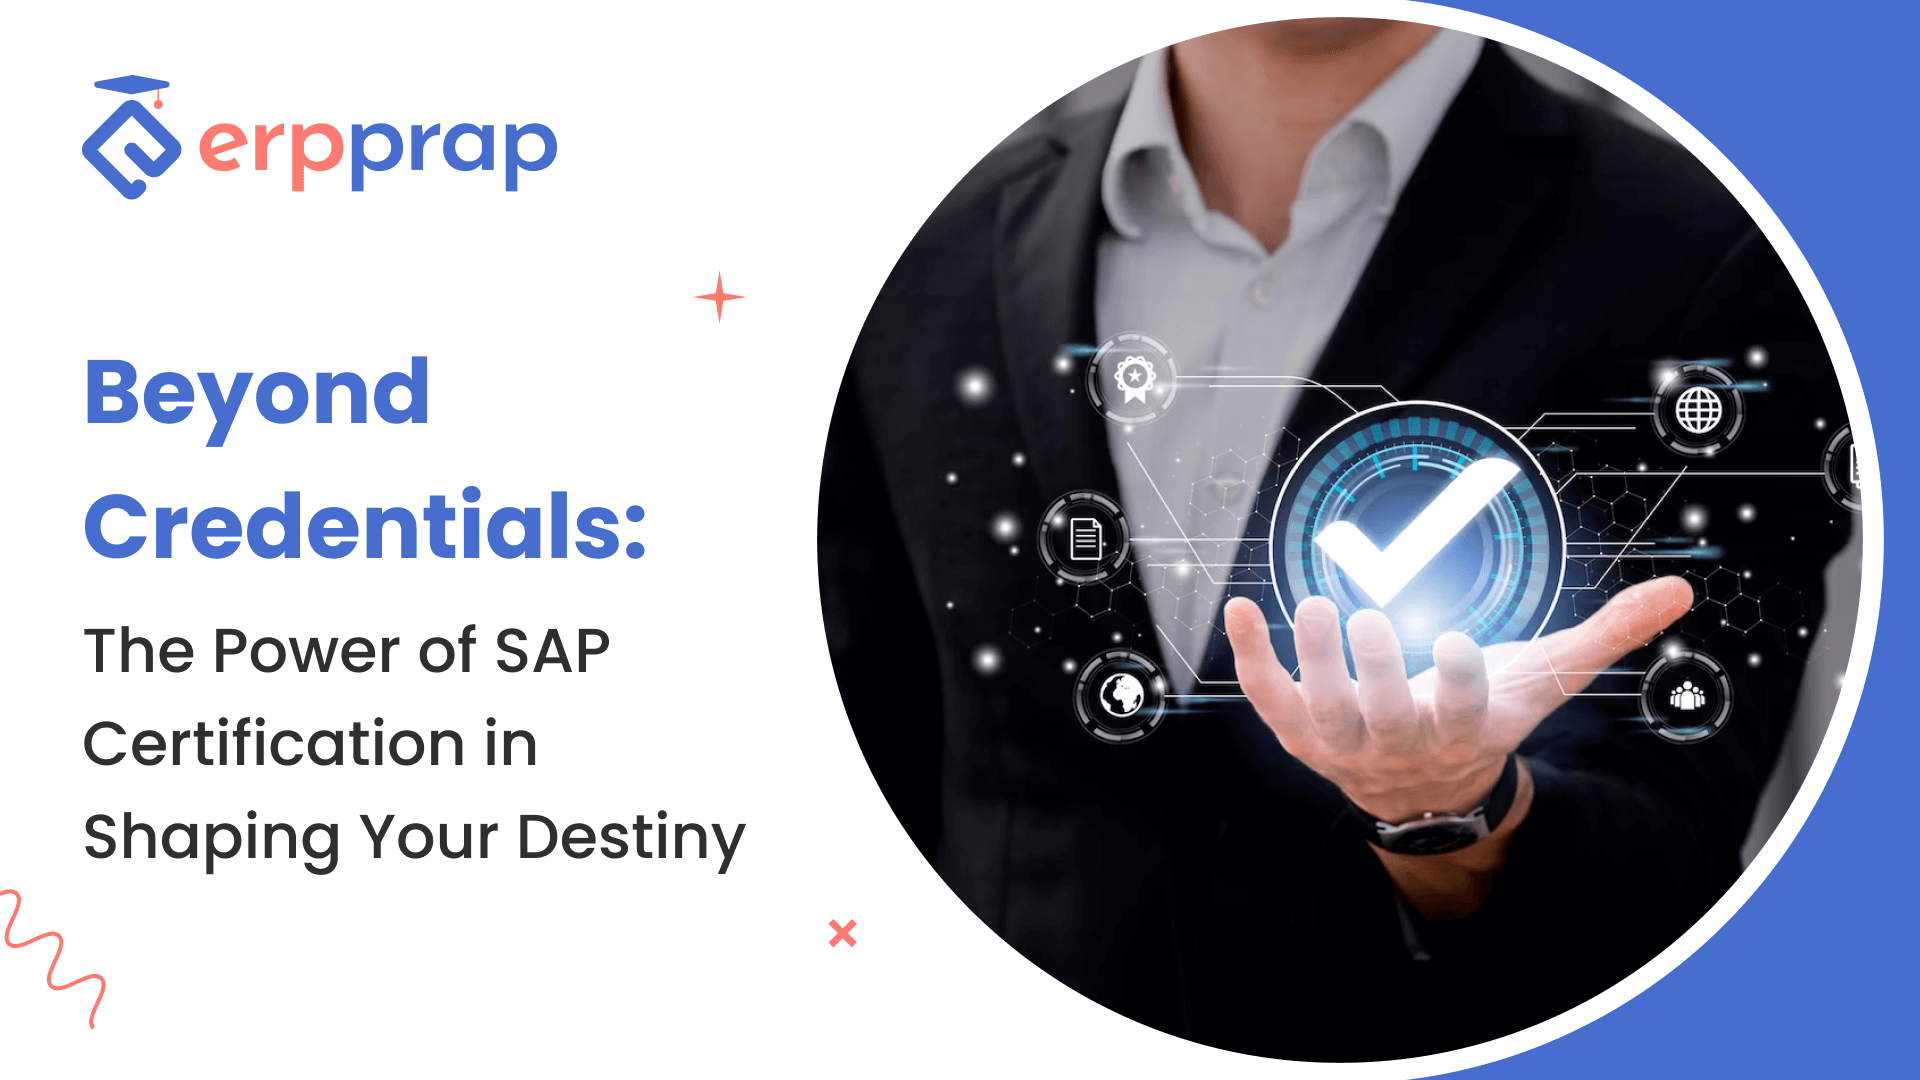 Beyond Credentials: The Power of SAP Certification in Shaping Your Destiny